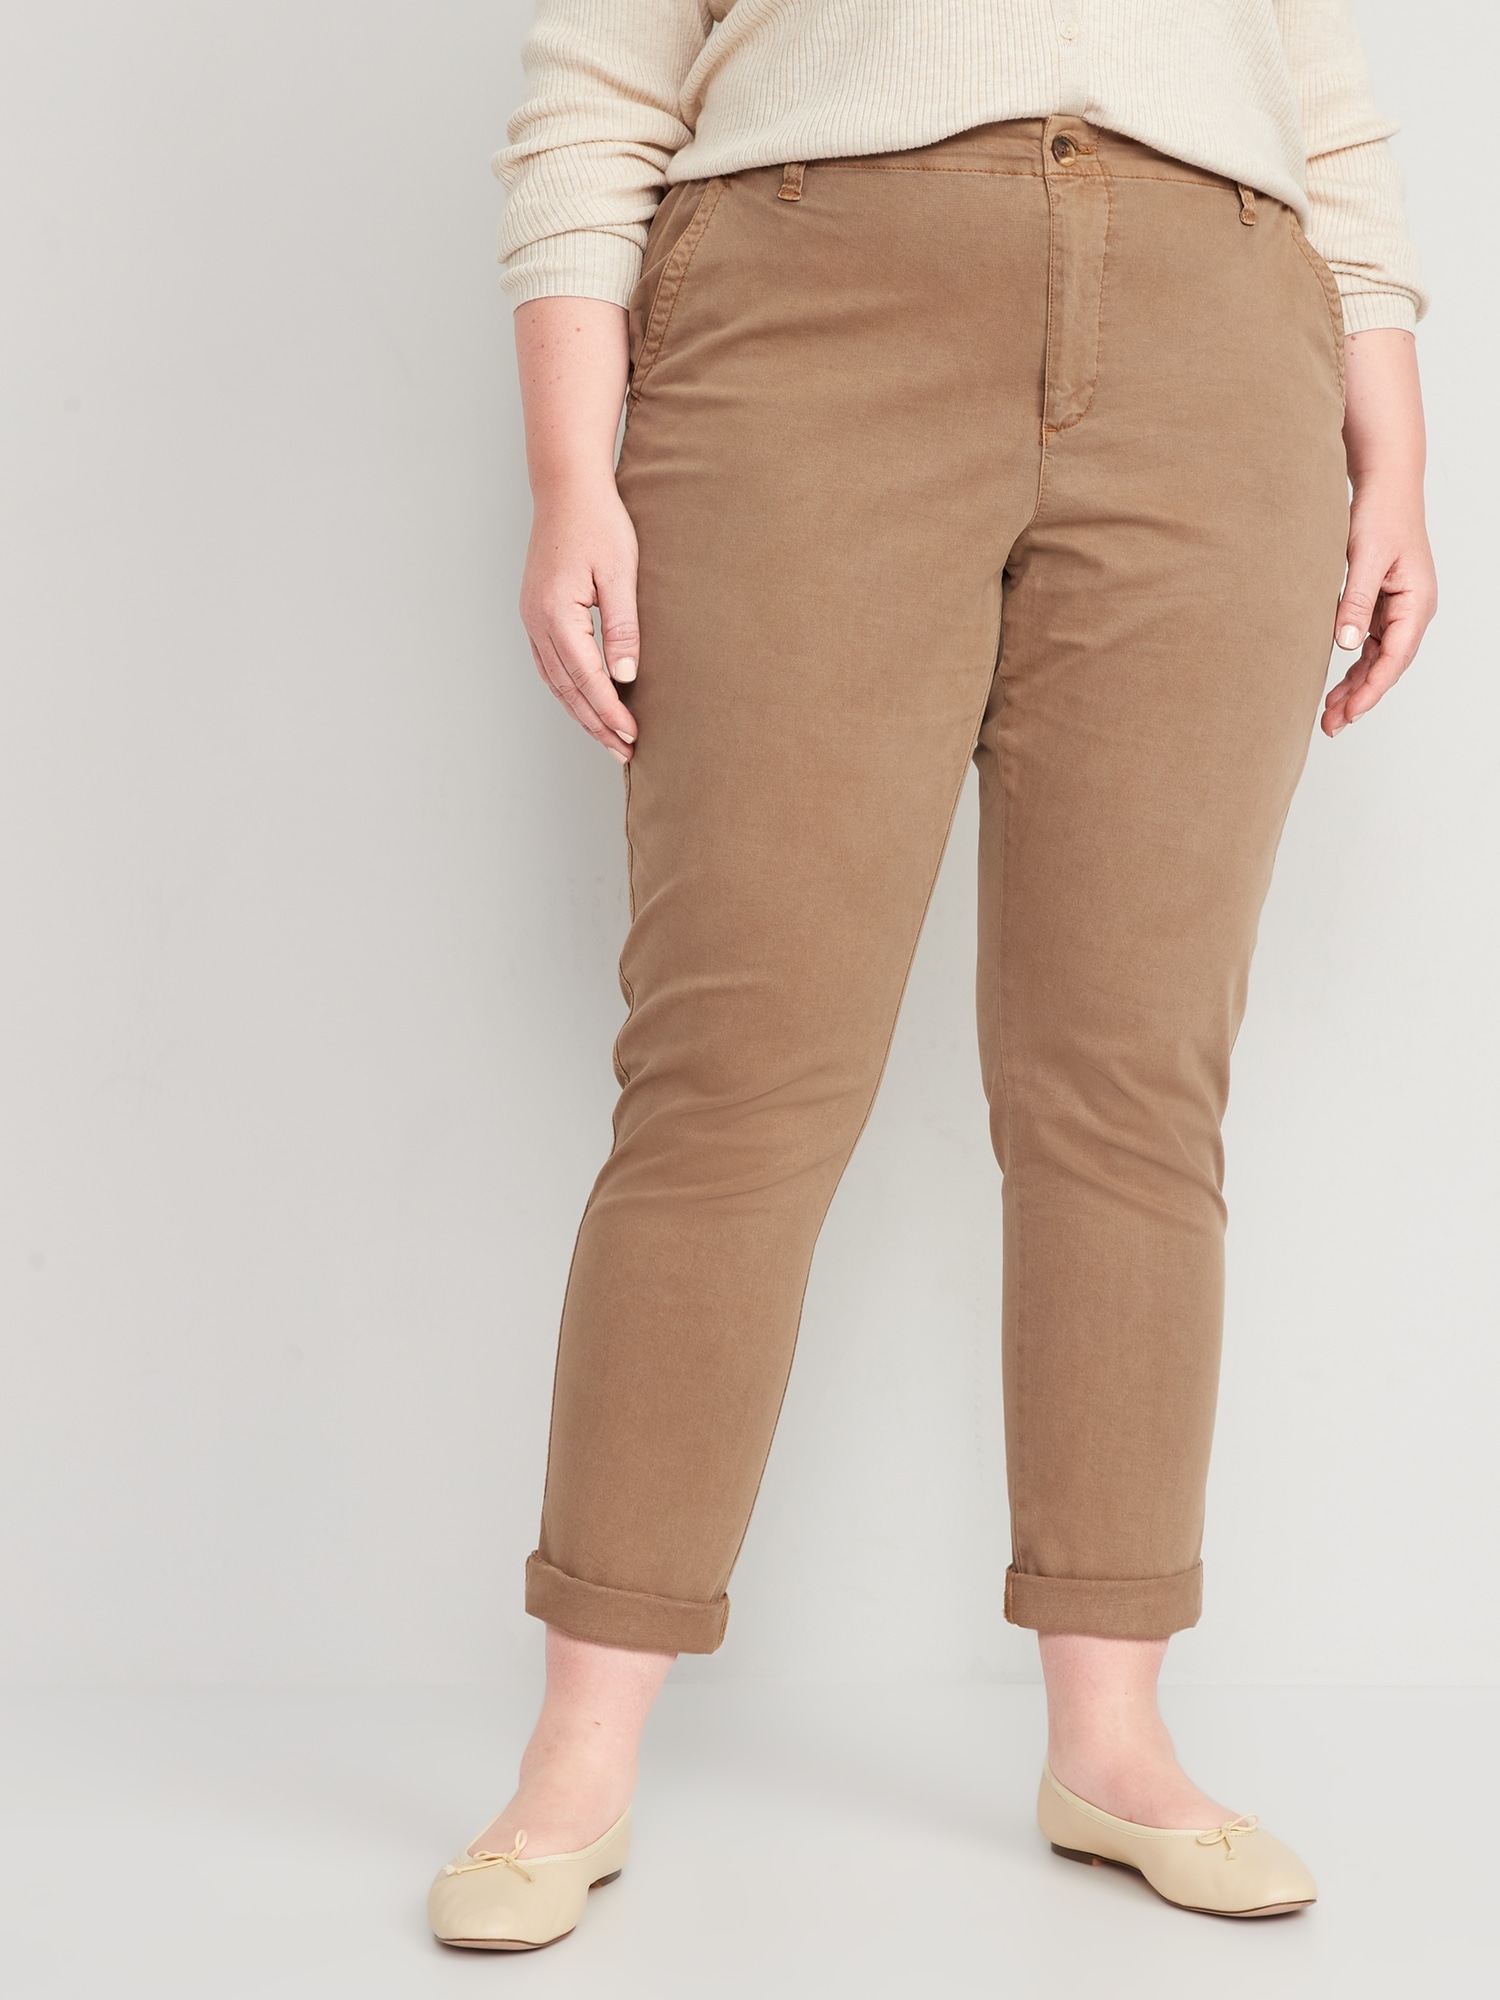 Old Navy Panther High-Waisted OGC Chino Pants Size 3X